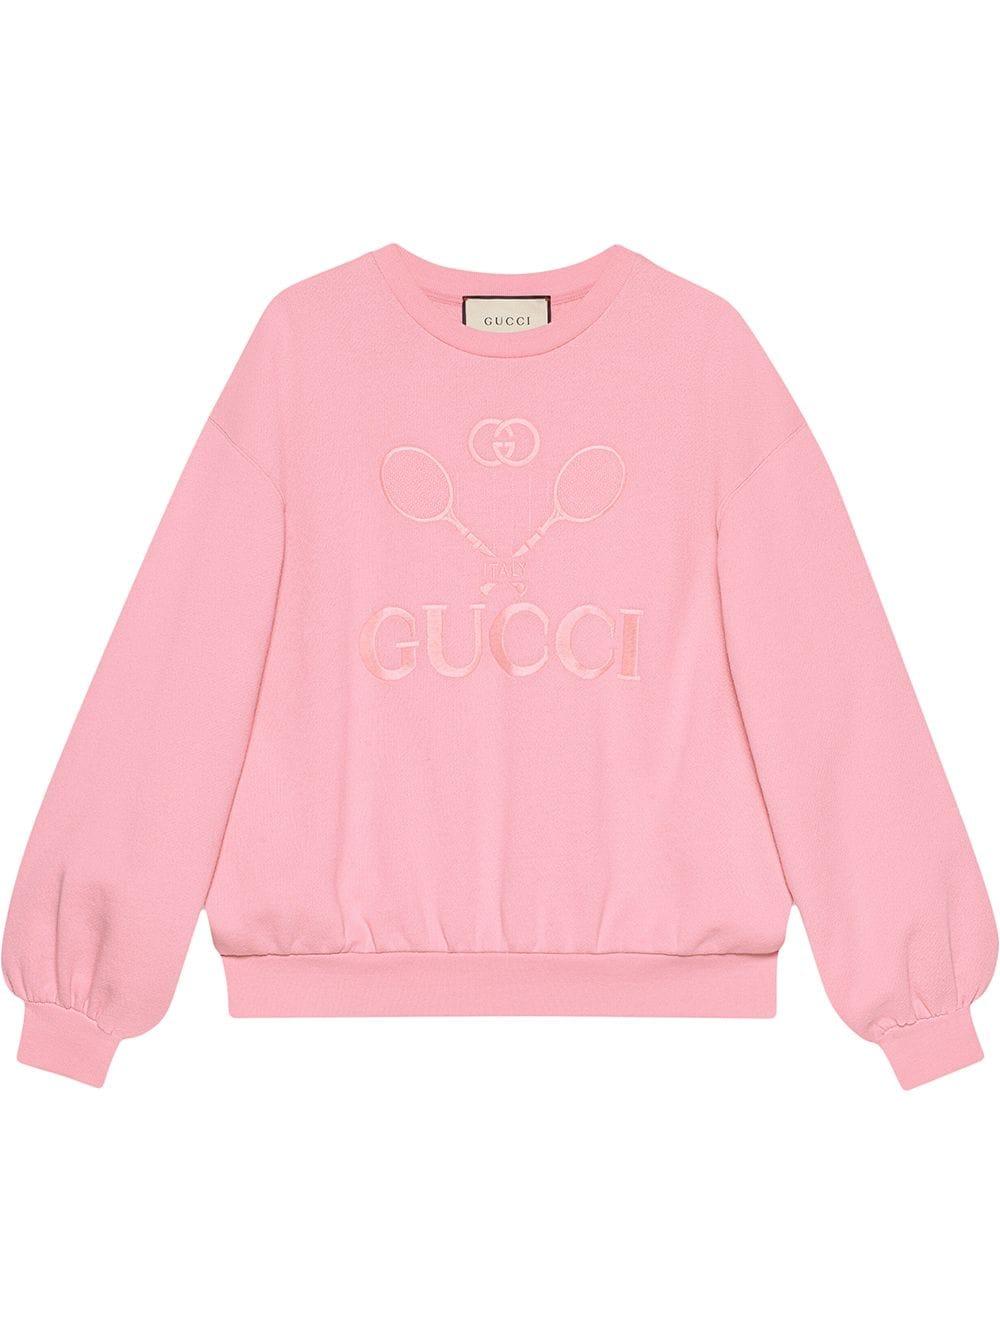 Gucci Oversize Sweatshirt With Tennis in Pink | Lyst